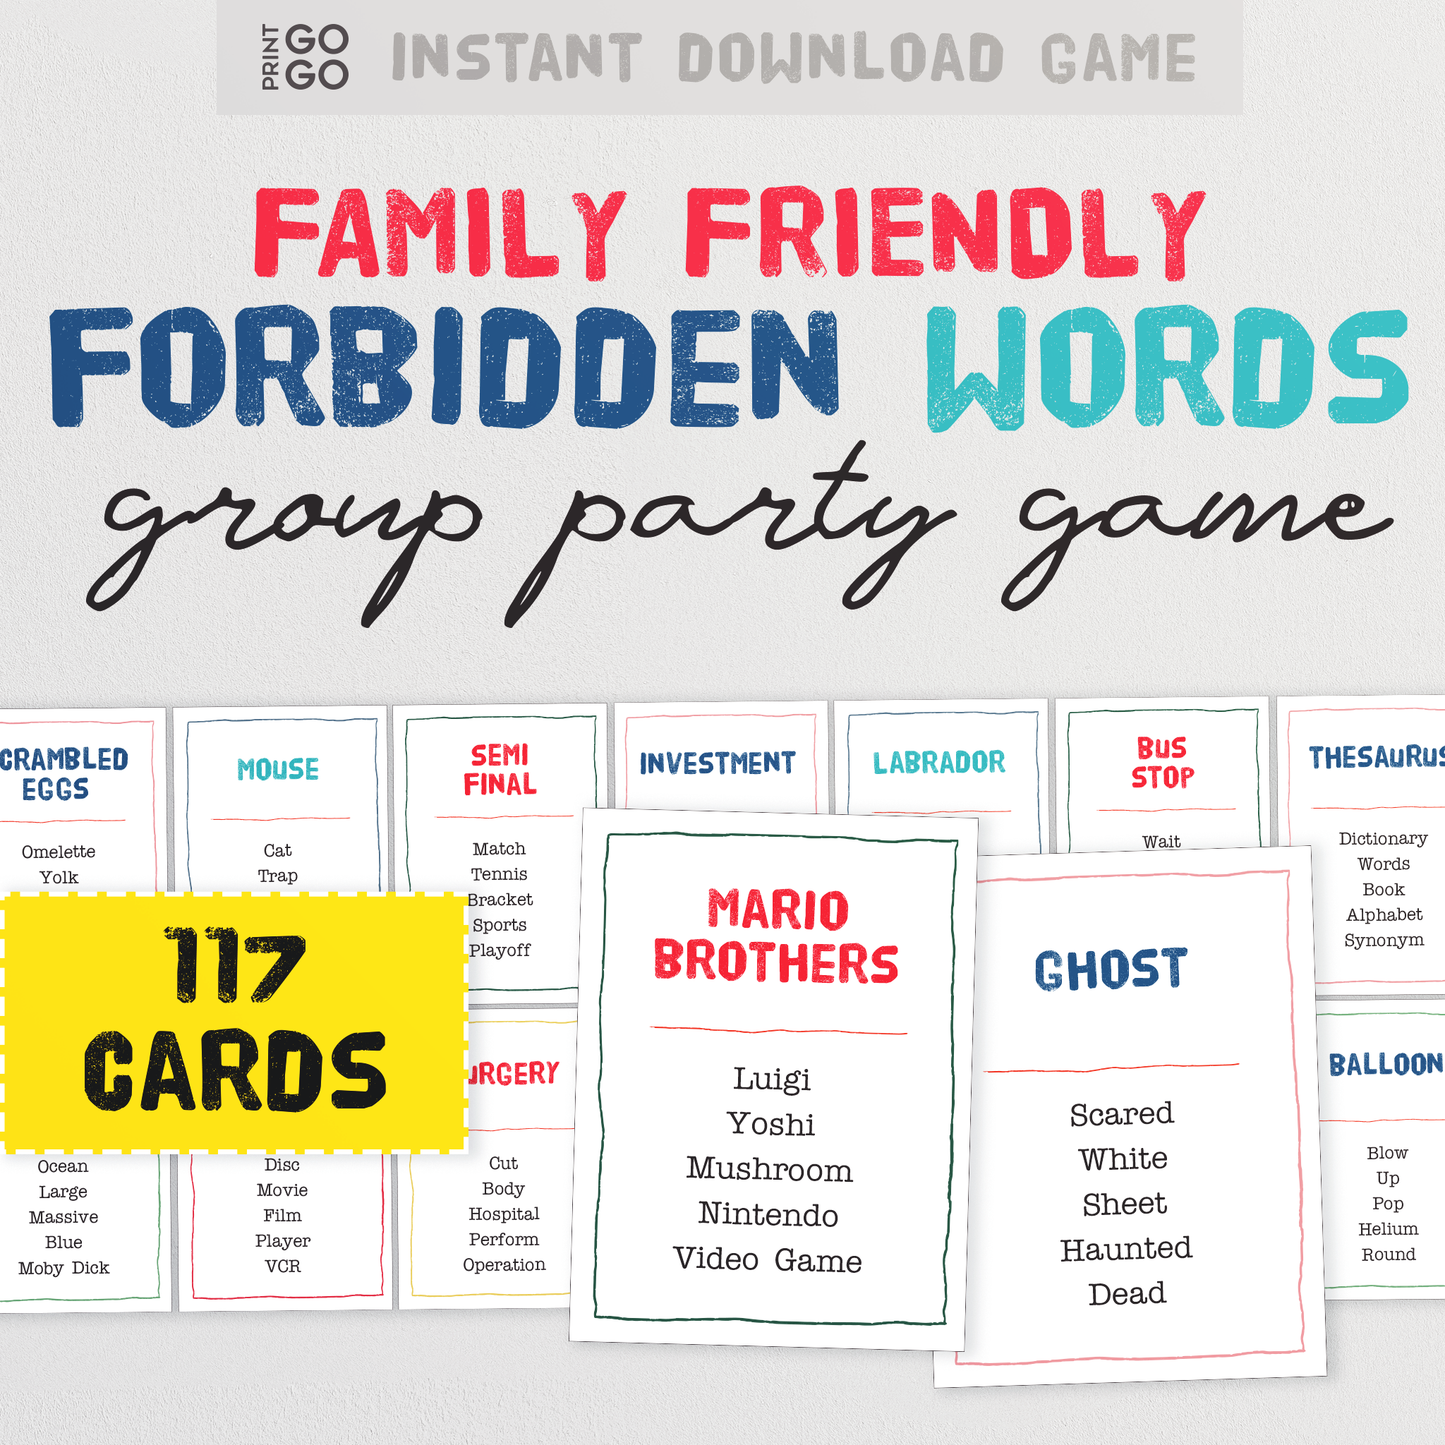 Family Friendly Forbidden Words - The Hilarious Party Game of Giving Careful Clues